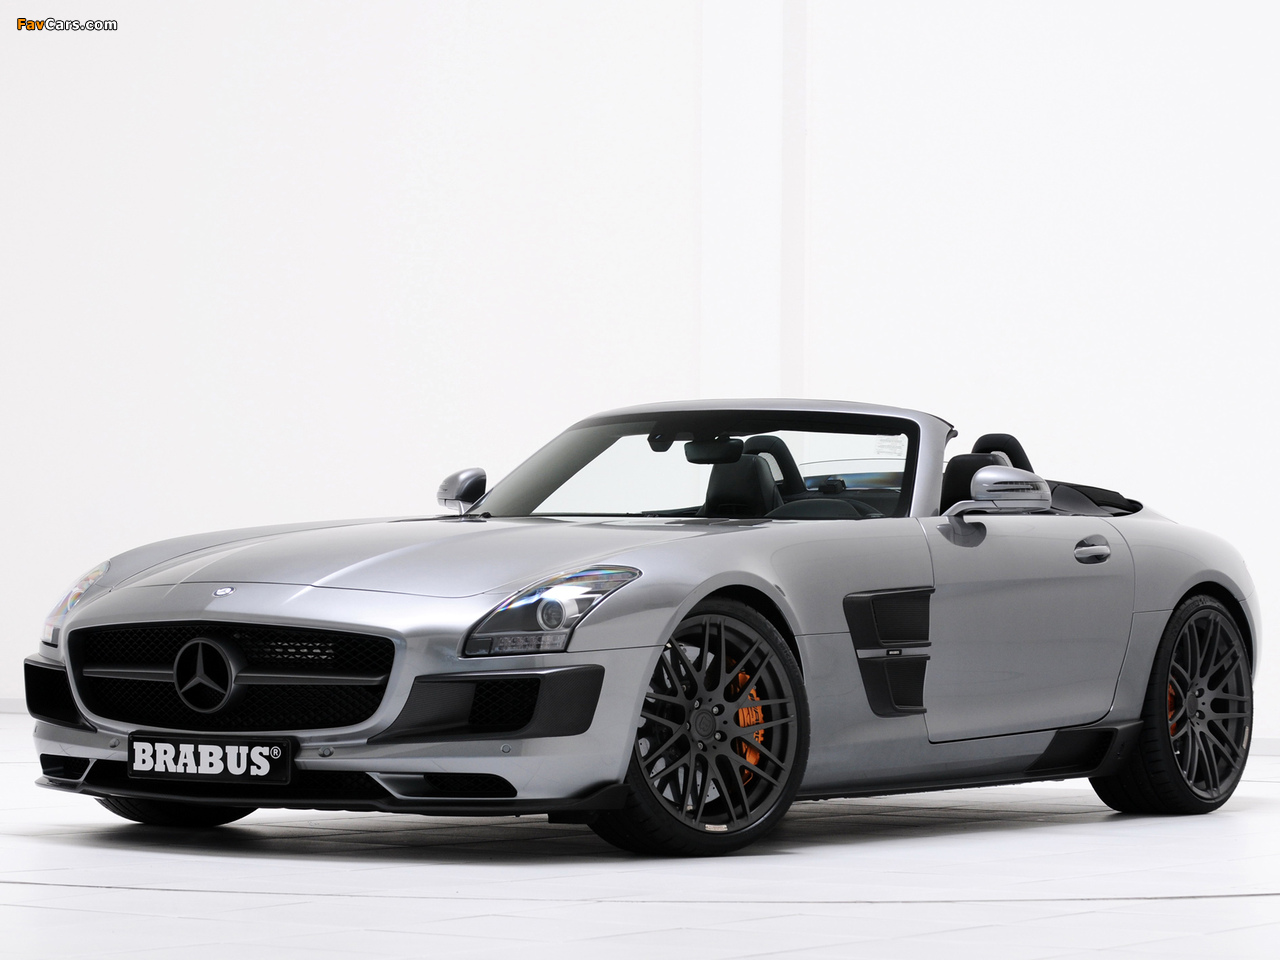 Brabus Mercedes-Benz SLS 63 AMG Roadster (R197) 2011 pictures (1280 x 960)